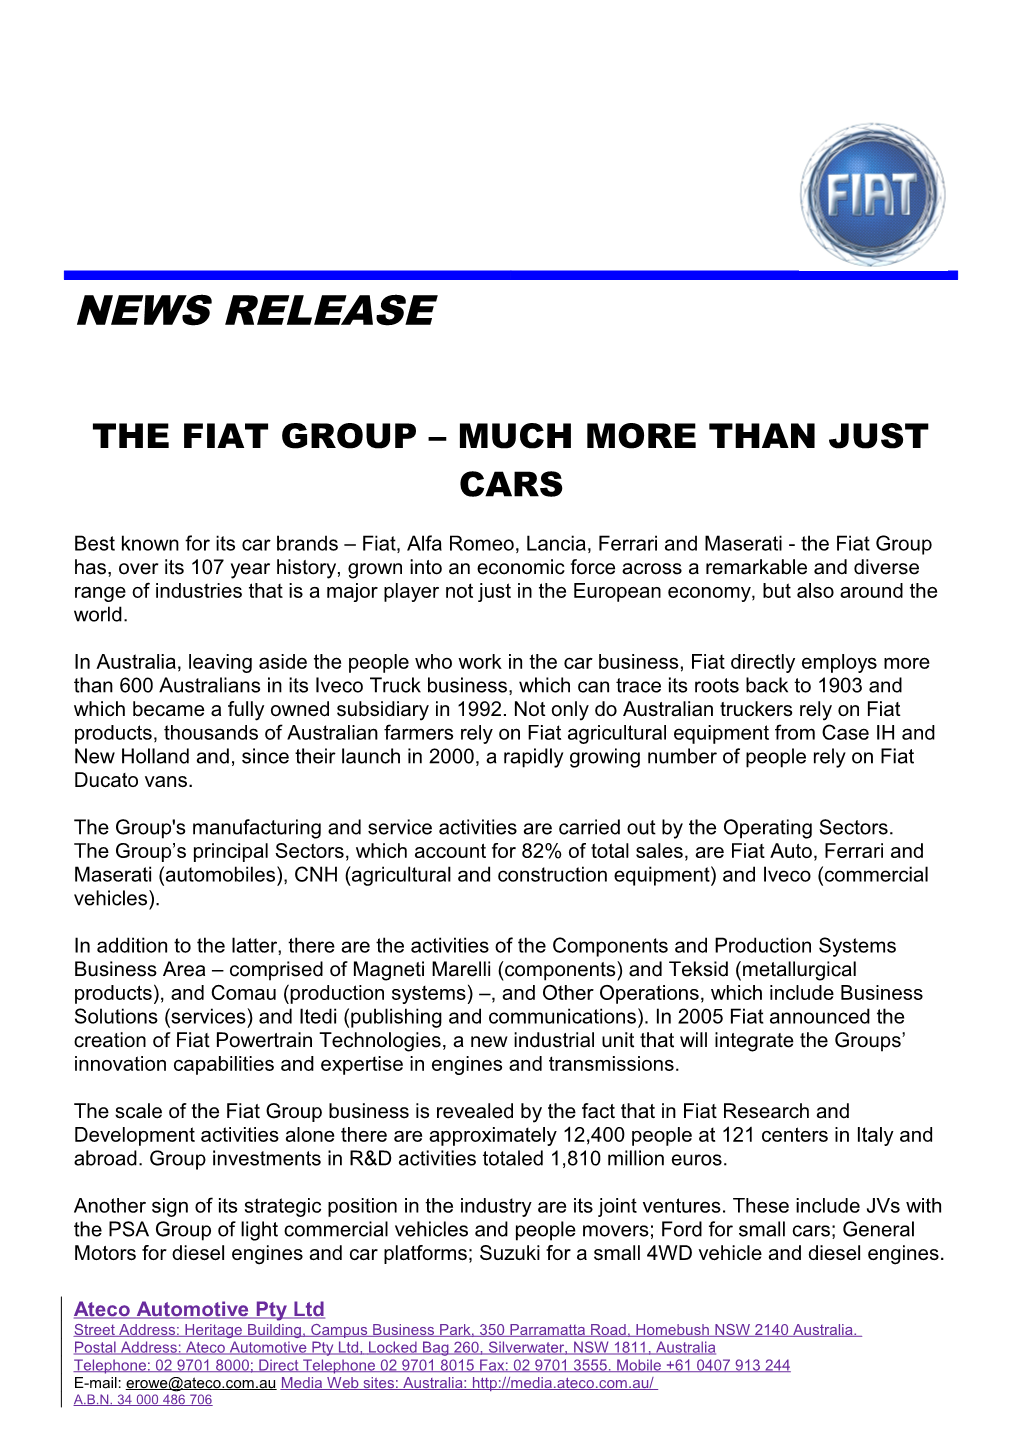 The Fiat Group Much More Than Just Cars